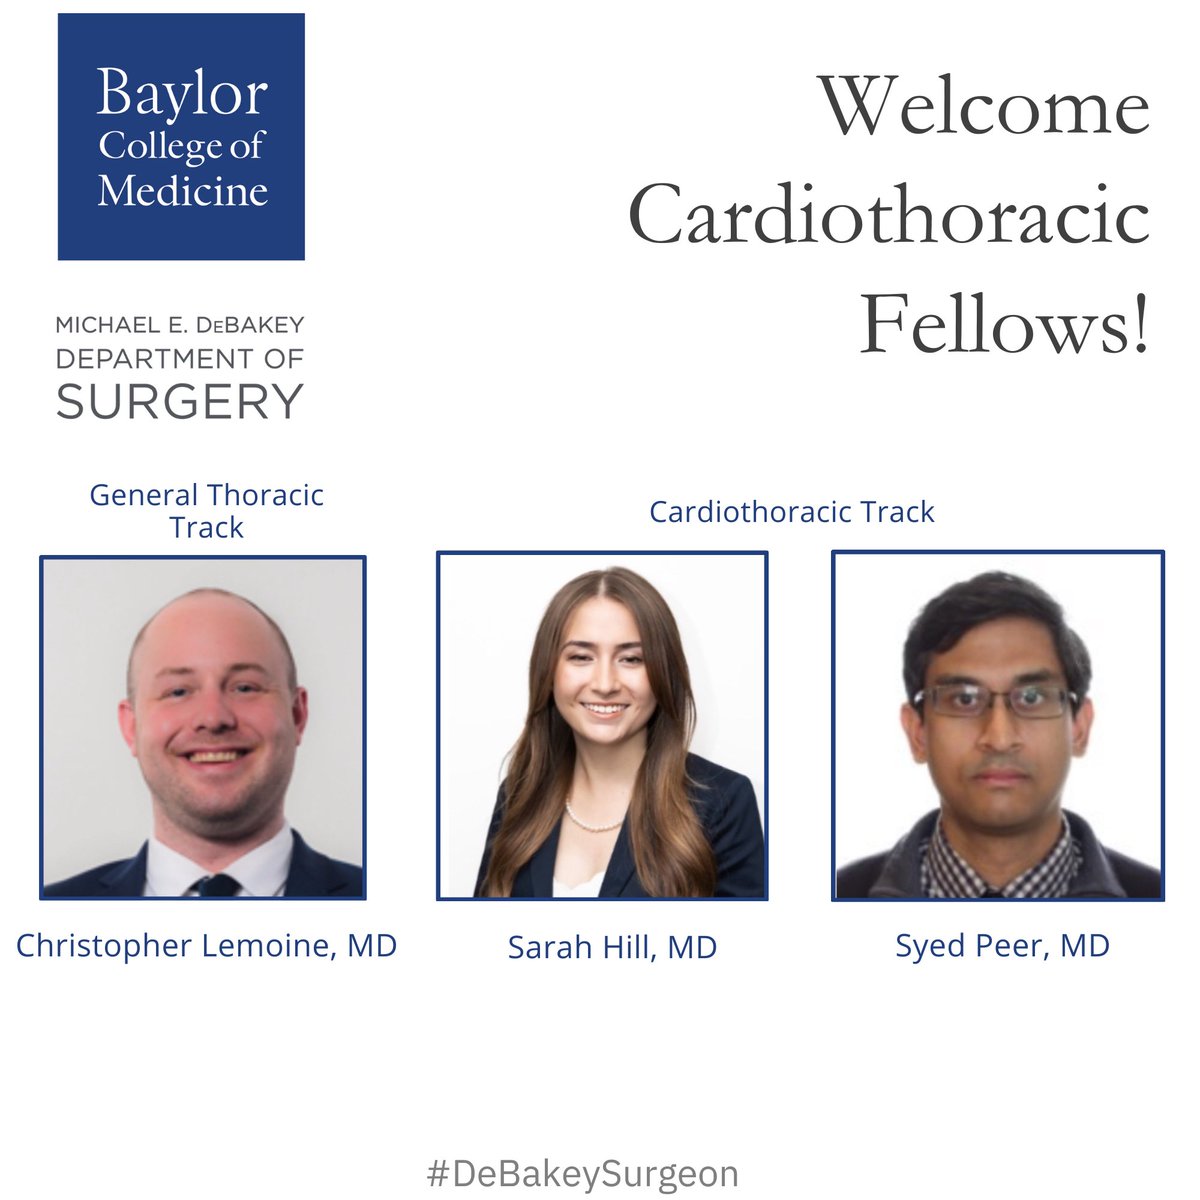 Very excited to welcome our newest Cardiothoracic Fellows! @DrRosengart @DrRaviGhanta @MarcMoonMD @DrShawnGroth @JCoselli_MD @vicenteorozco2 @LaurenBarronMD @RTaylorRipley @LorraineC_MD